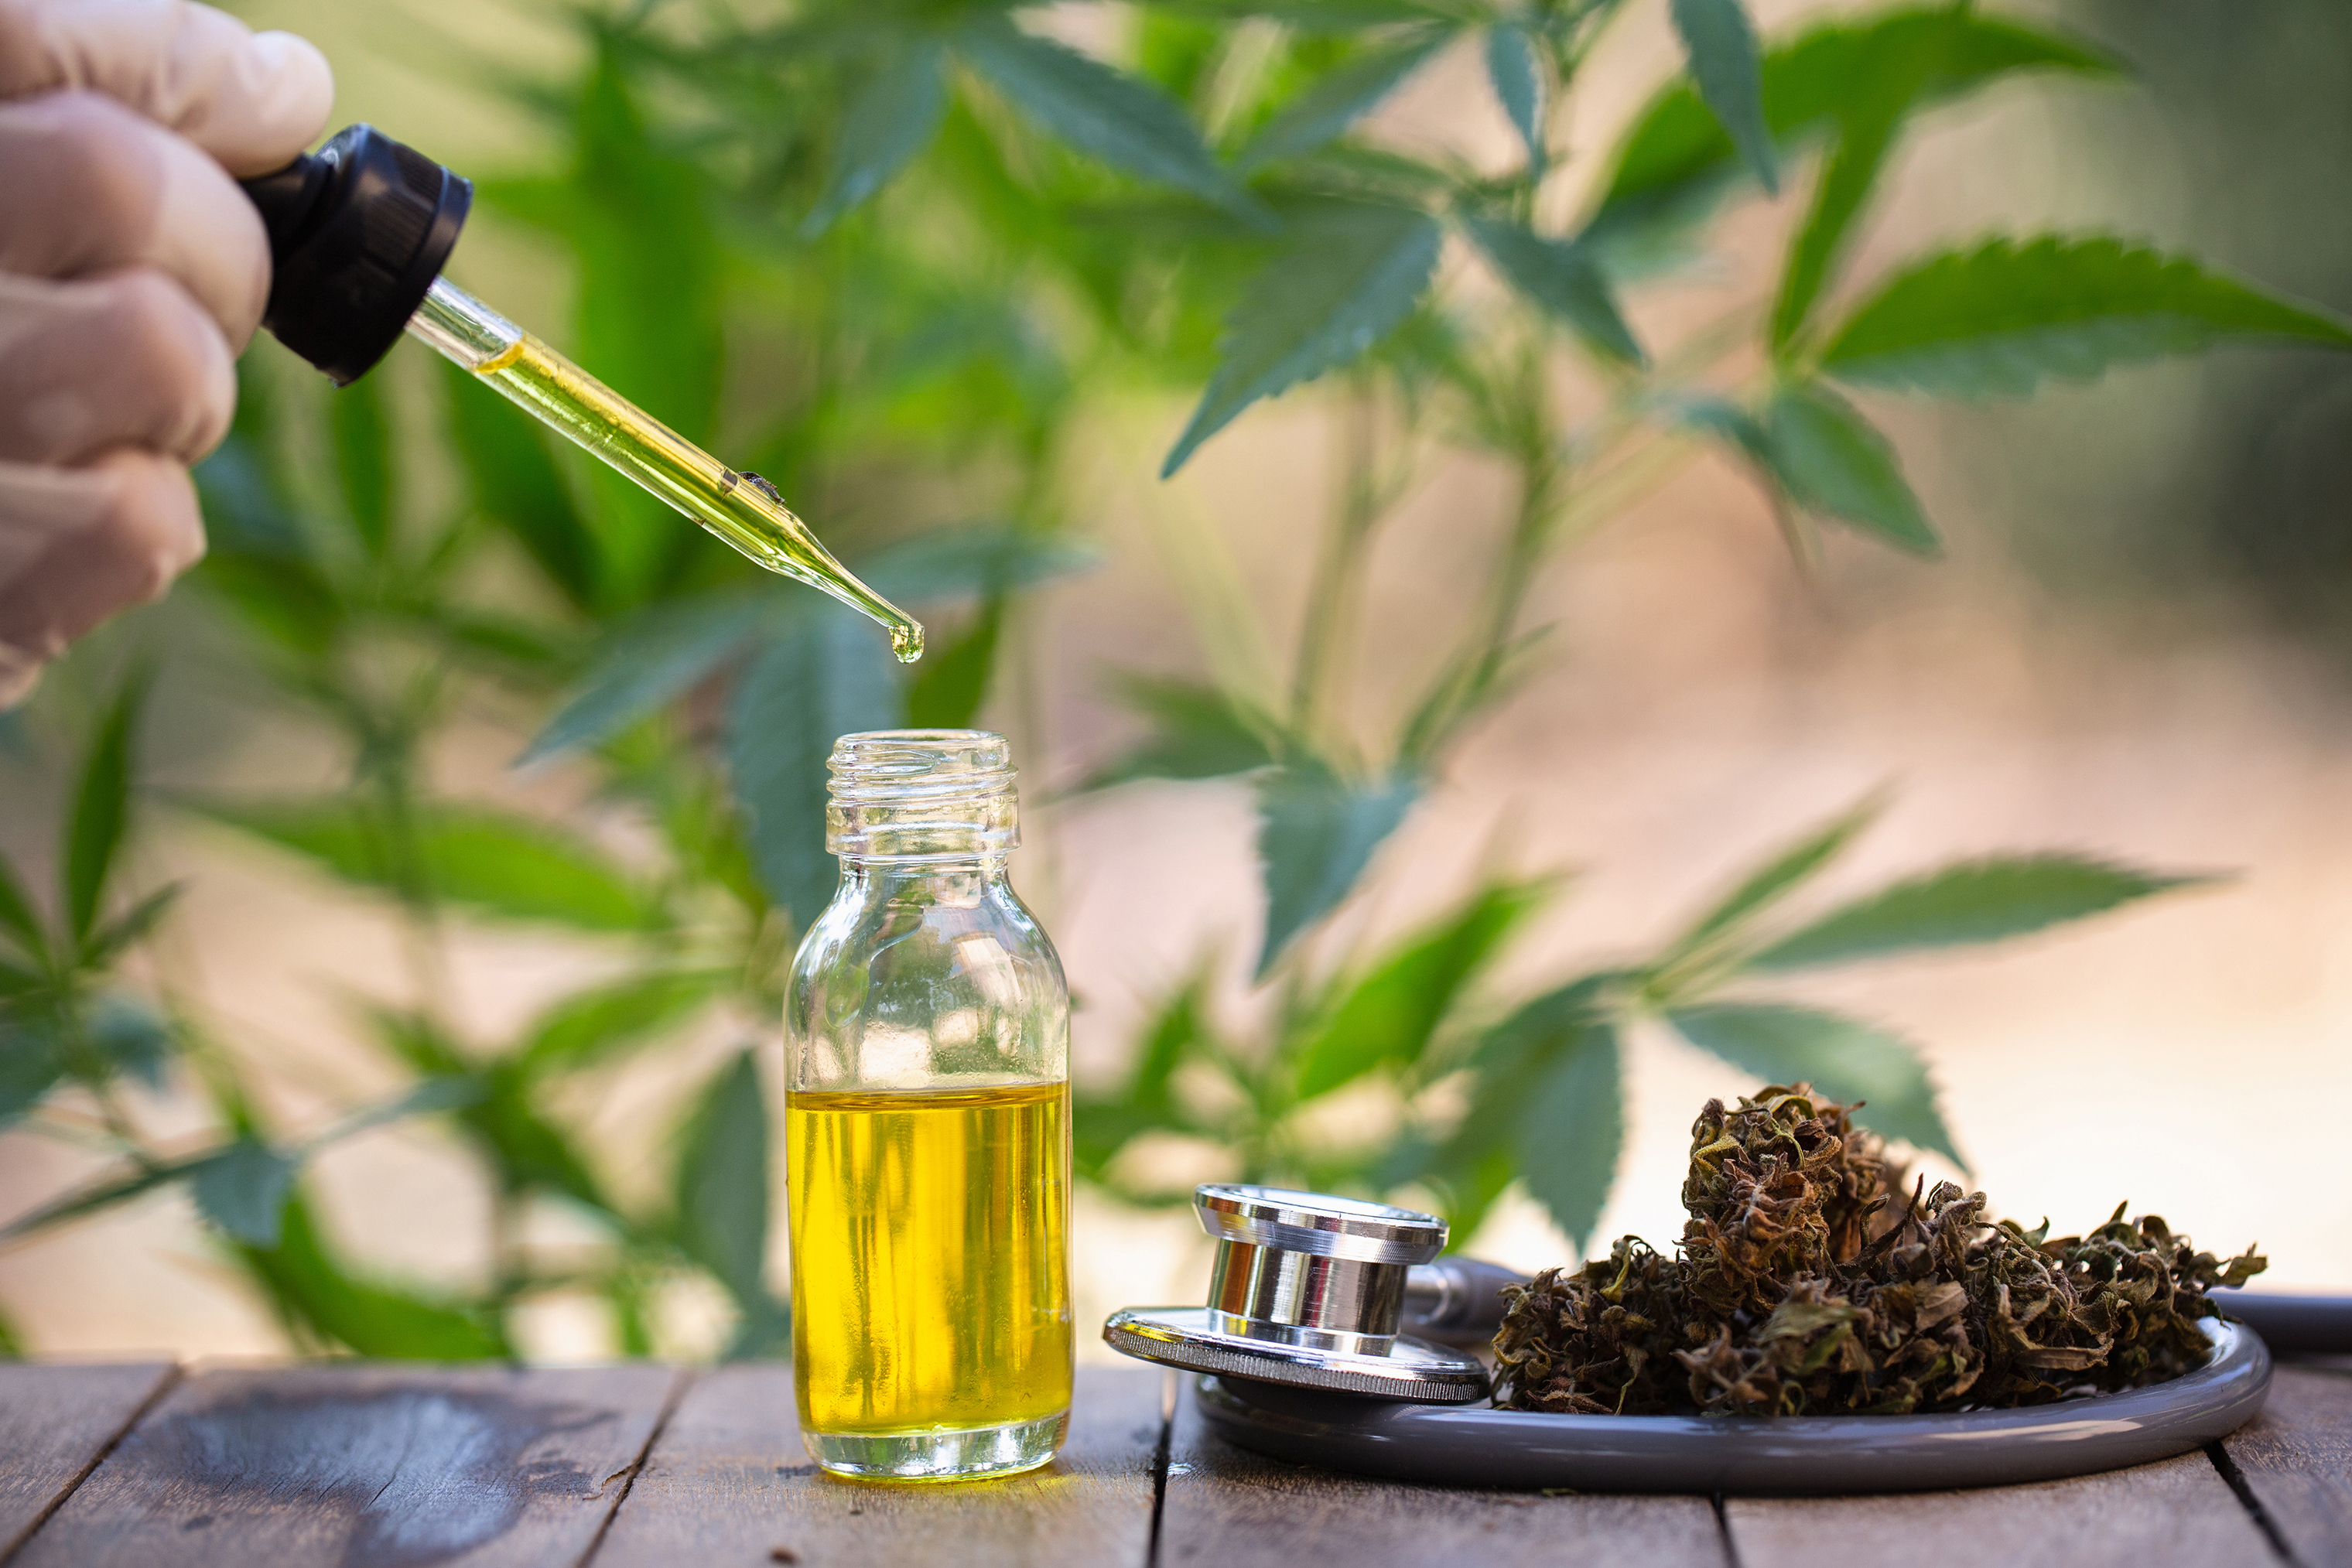 What If Cbd Oil Doesn't Work - Cbd|Oil|Cannabidiol|Products|View|Abstract|Effects|Hemp|Cannabis|Product|Thc|Pain|People|Health|Body|Plant|Cannabinoids|Medications|Oils|Drug|Benefits|System|Study|Marijuana|Anxiety|Side|Research|Effect|Liver|Quality|Treatment|Studies|Epilepsy|Symptoms|Gummies|Compounds|Dose|Time|Inflammation|Bottle|Cbd Oil|View Abstract|Side Effects|Cbd Products|Endocannabinoid System|Multiple Sclerosis|Cbd Oils|Cbd Gummies|Cannabis Plant|Hemp Oil|Cbd Product|Hemp Plant|United States|Cytochrome P450|Many People|Chronic Pain|Nuleaf Naturals|Royal Cbd|Full-Spectrum Cbd Oil|Drug Administration|Cbd Oil Products|Medical Marijuana|Drug Test|Heavy Metals|Clinical Trial|Clinical Trials|Cbd Oil Side|Rating Highlights|Wide Variety|Animal Studies